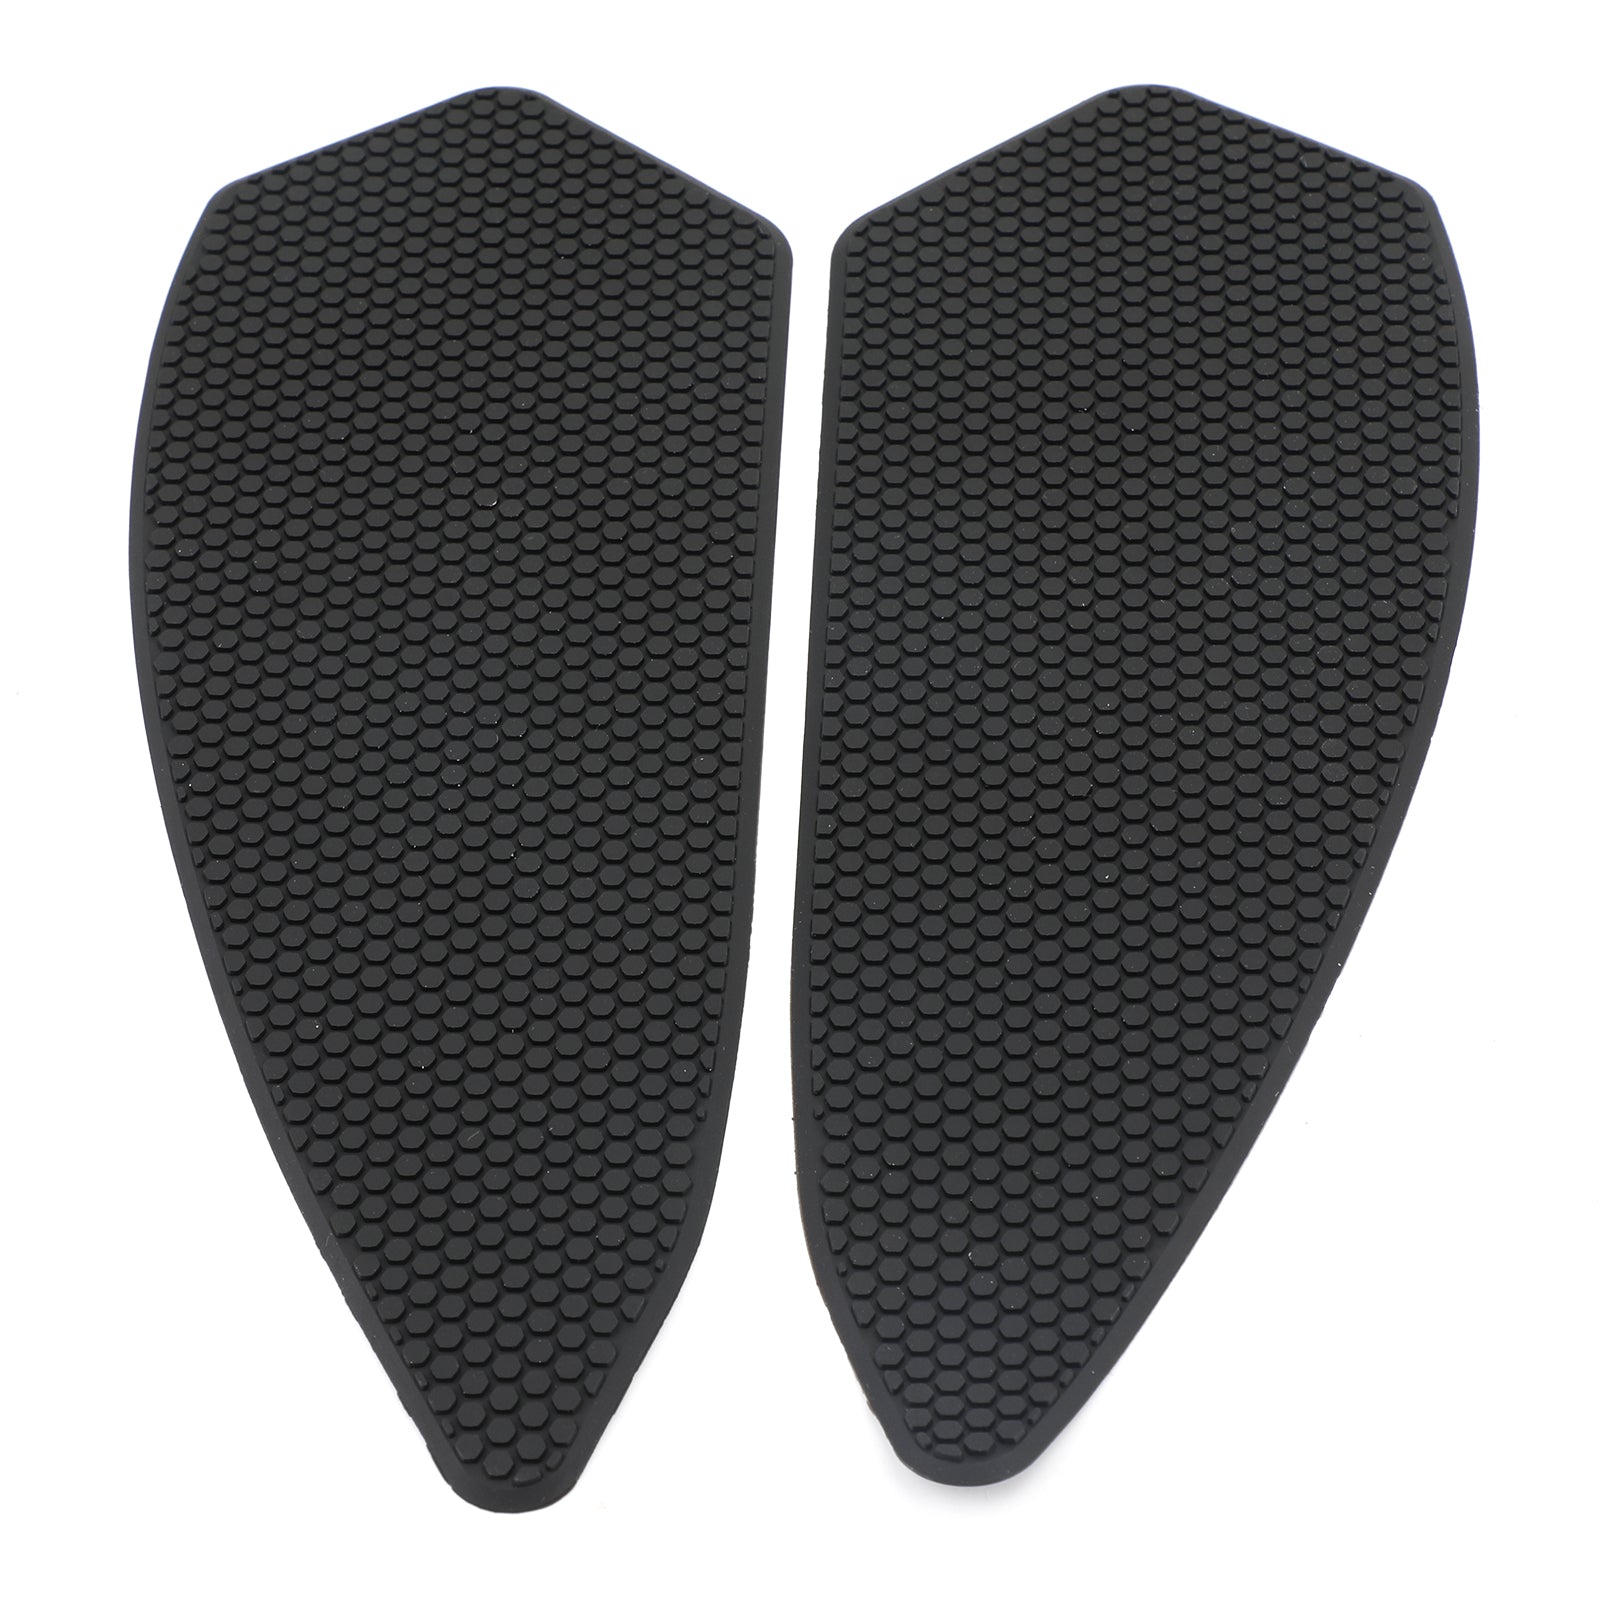 2020+ BMW S1000RR Tank Side Pads Traction Grips Black